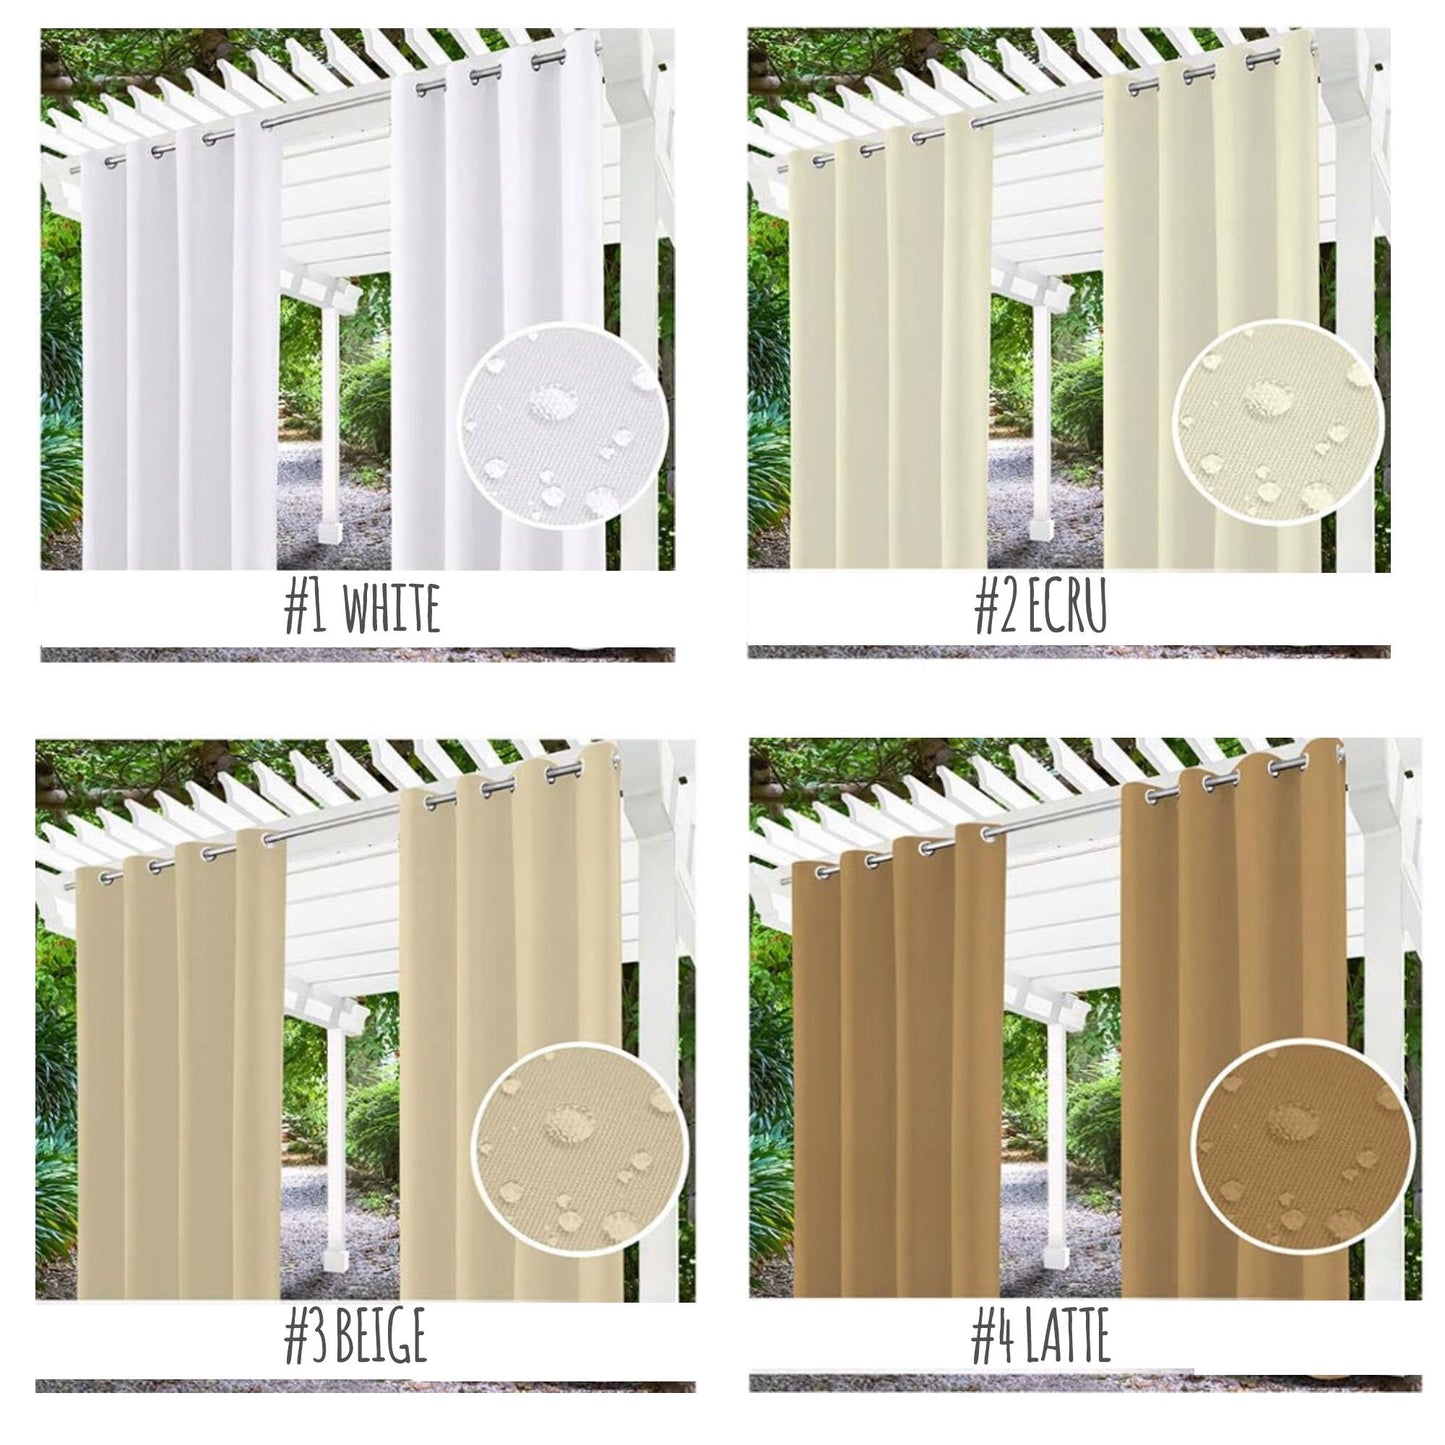 Waterproof Curtain for Patio | UV & Fade Resistant Outside Curtain for Garden Pergola Porch Curtain| 1 PANEL | 155x220cm 61x86.5"